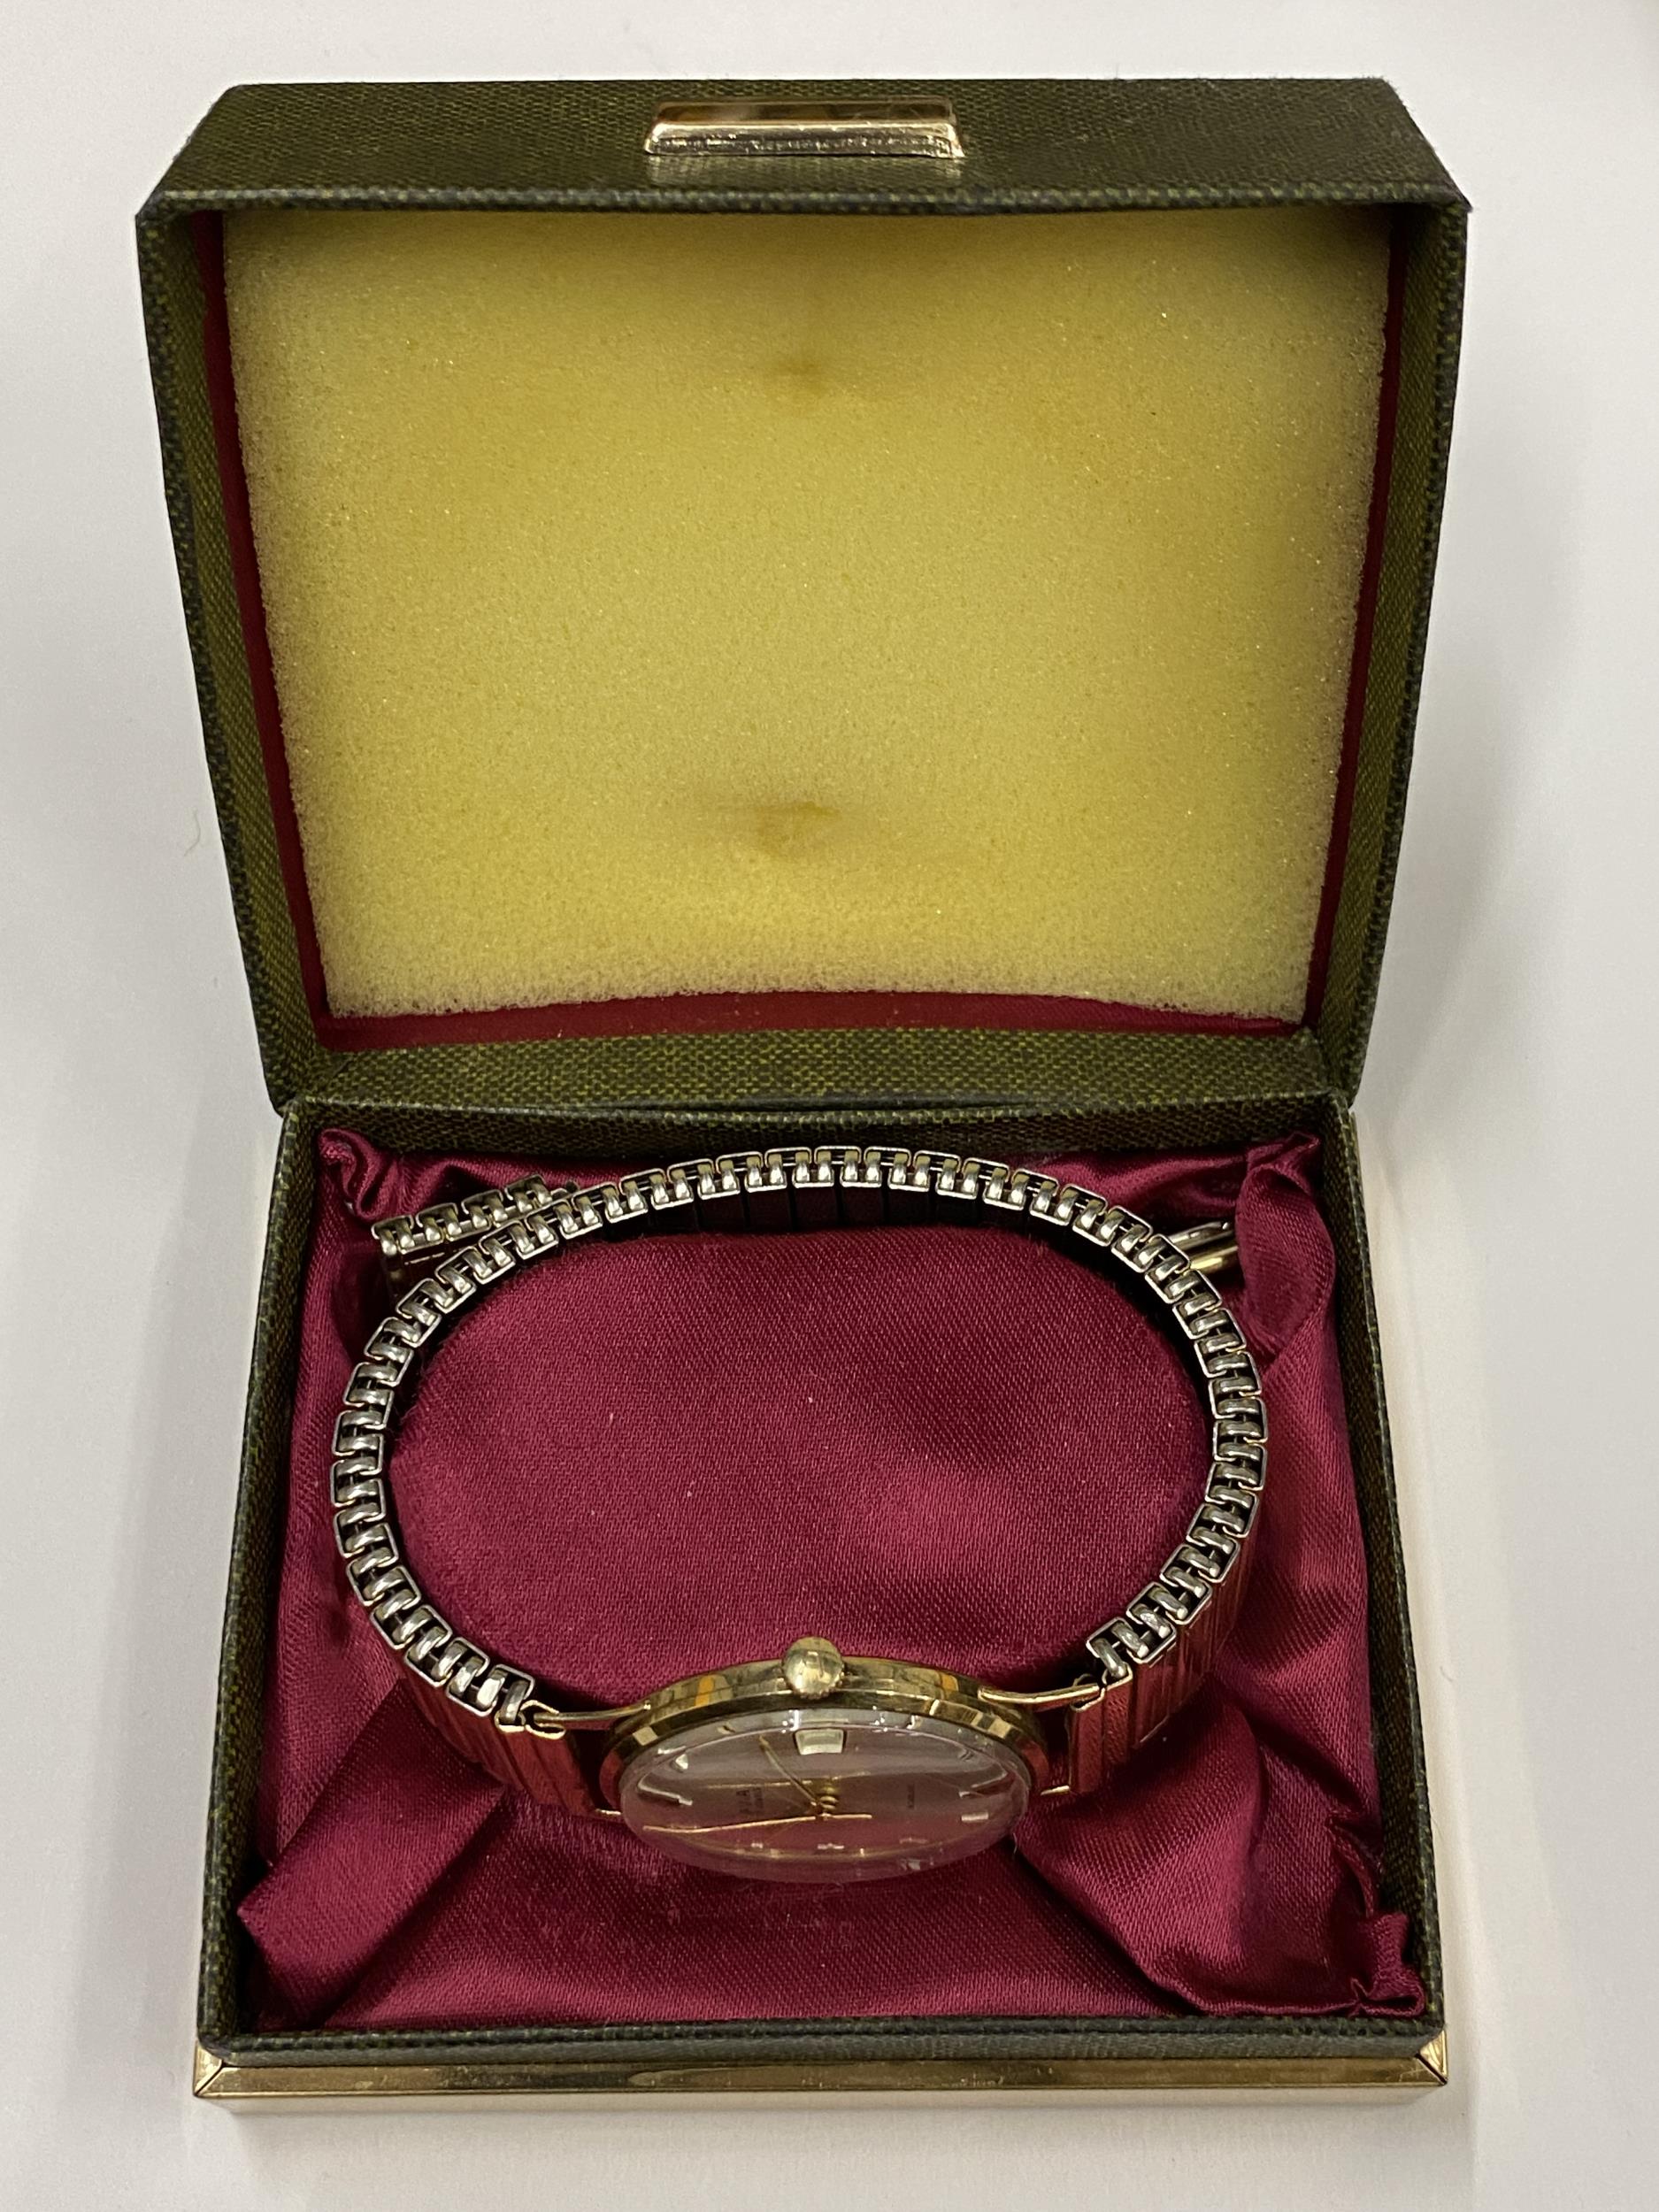 A GENTS 9CT GOLD CASED AVIA MANUAL WIND DATE WATCH WITH FLEXI STRAP IN ORIGINAL BOX - Image 6 of 7